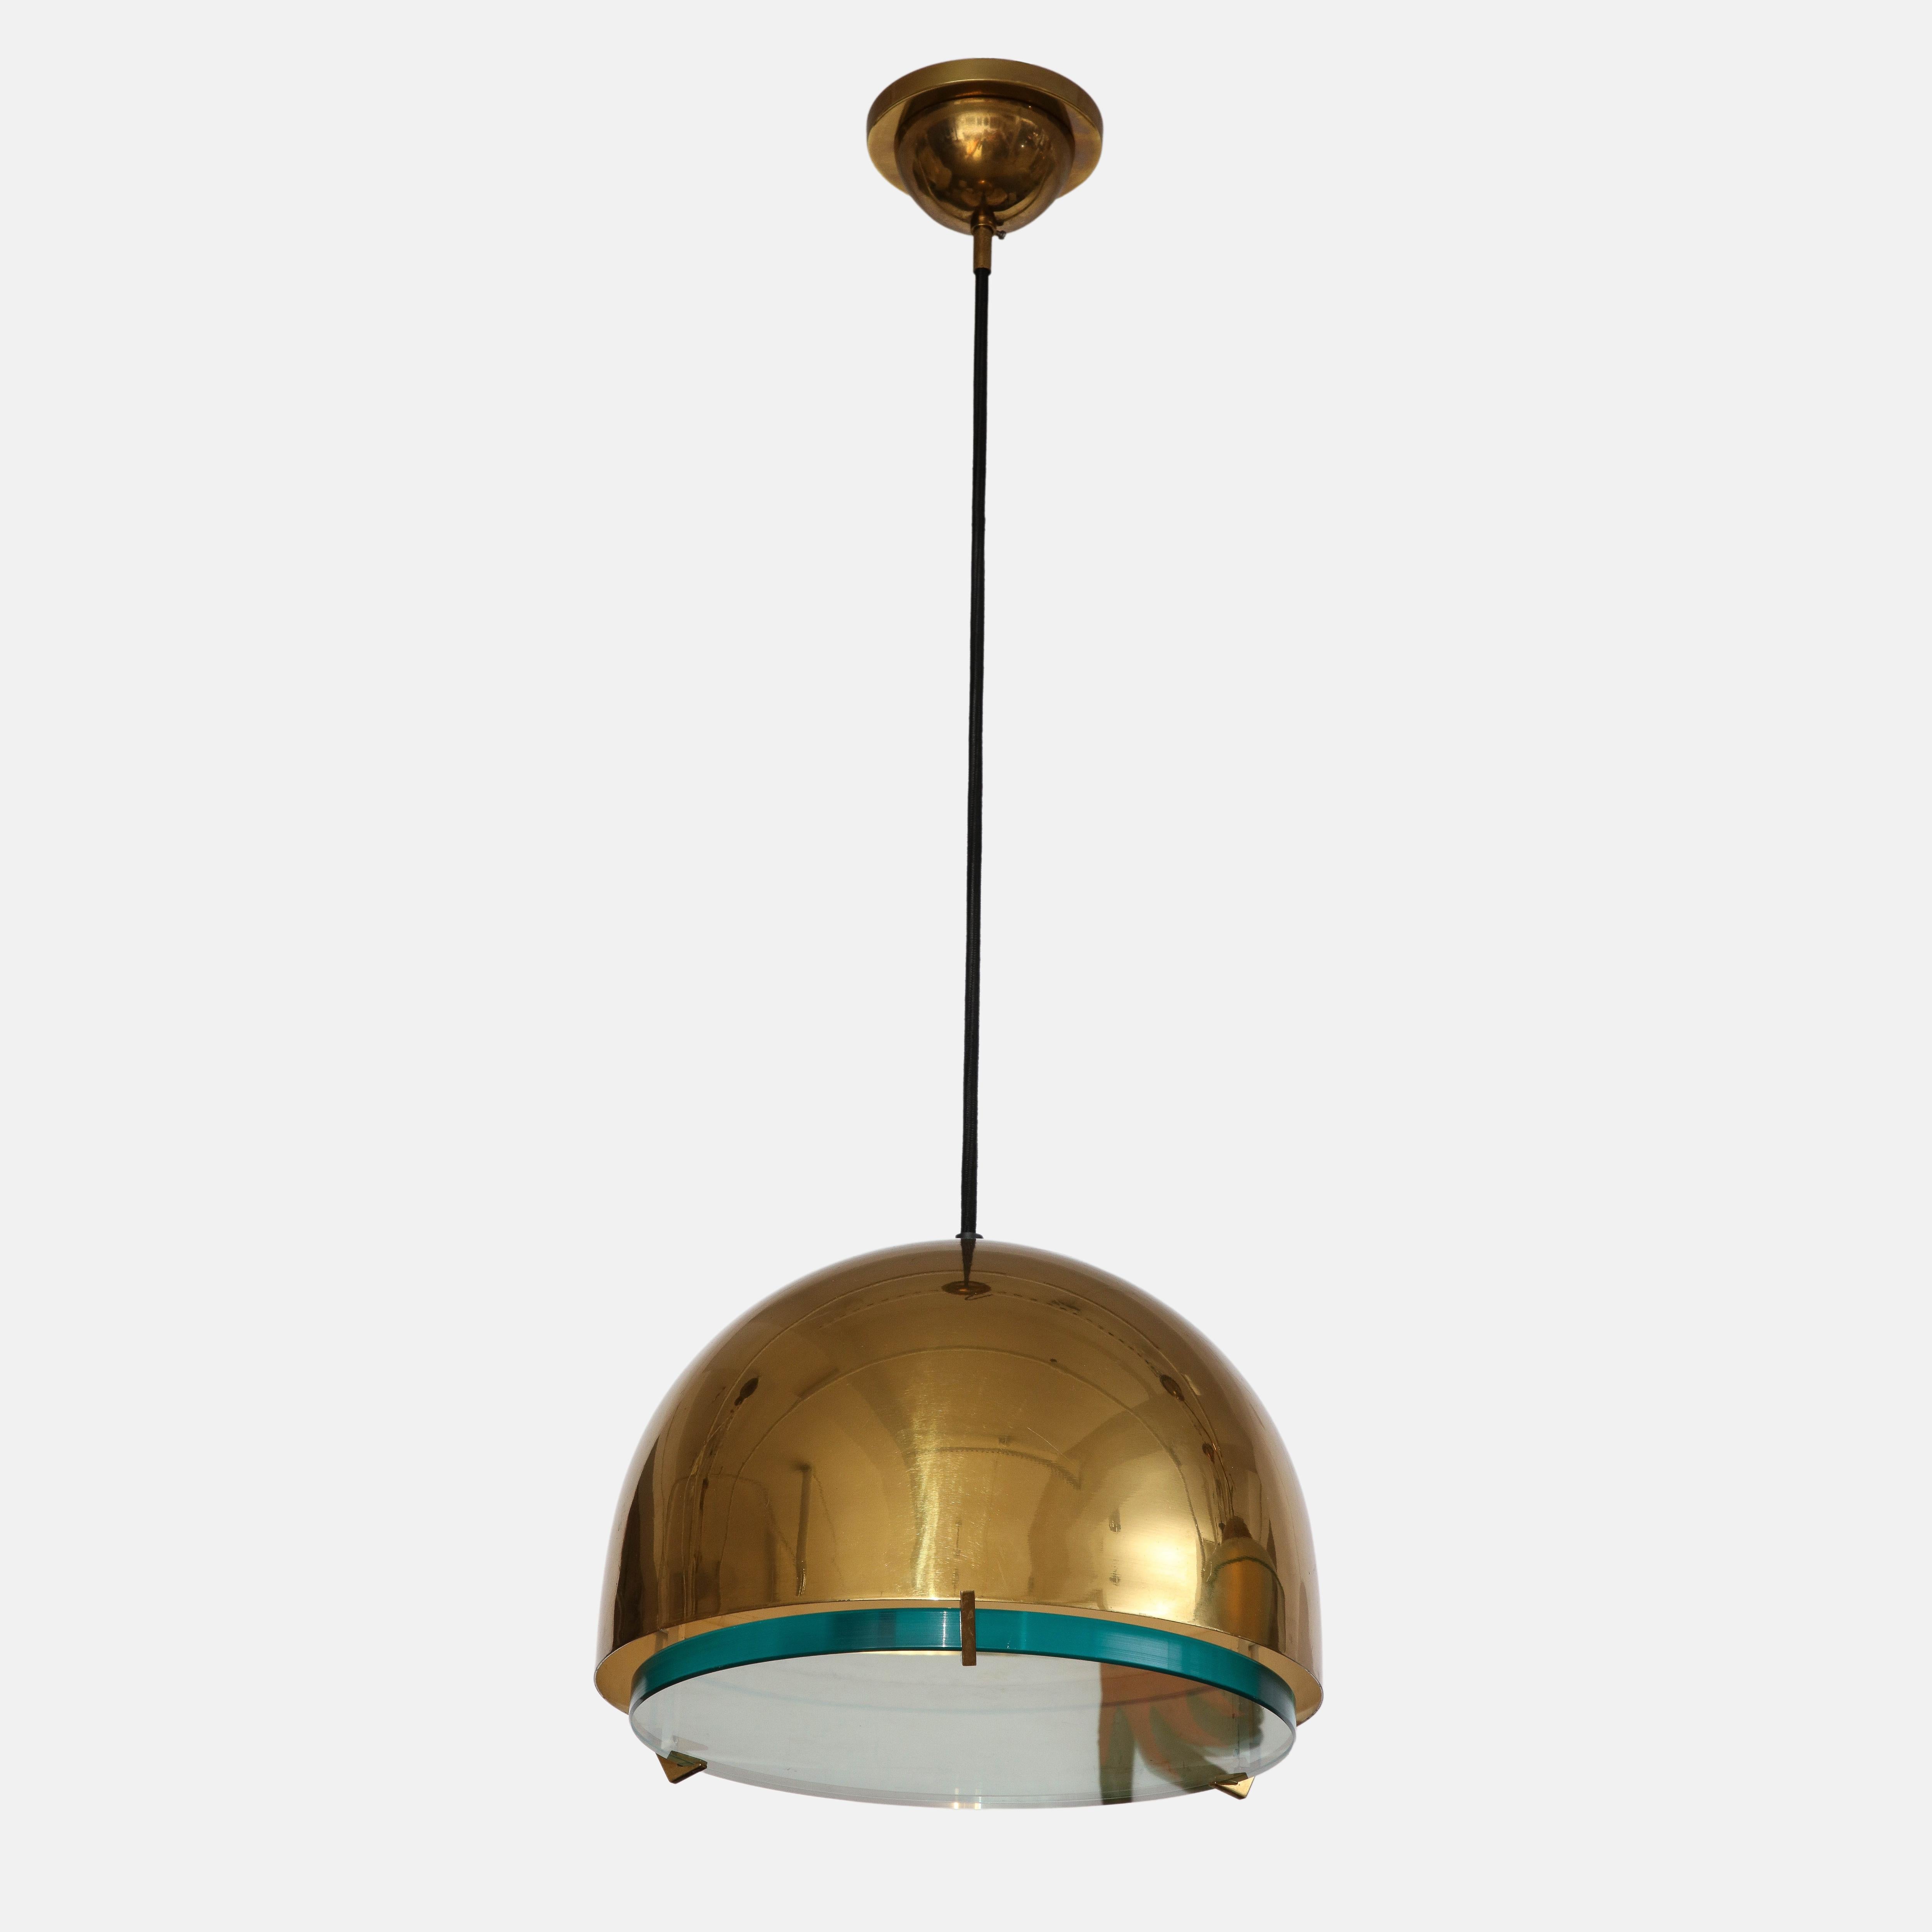 Max Ingrand for Fontana Arte pendant or suspension light model 2409 consisting of dome-shaped brass shade and a thick polished clear crystal glass diffuser held by three brass brackets suspended by thick black silk cord with variable drop on